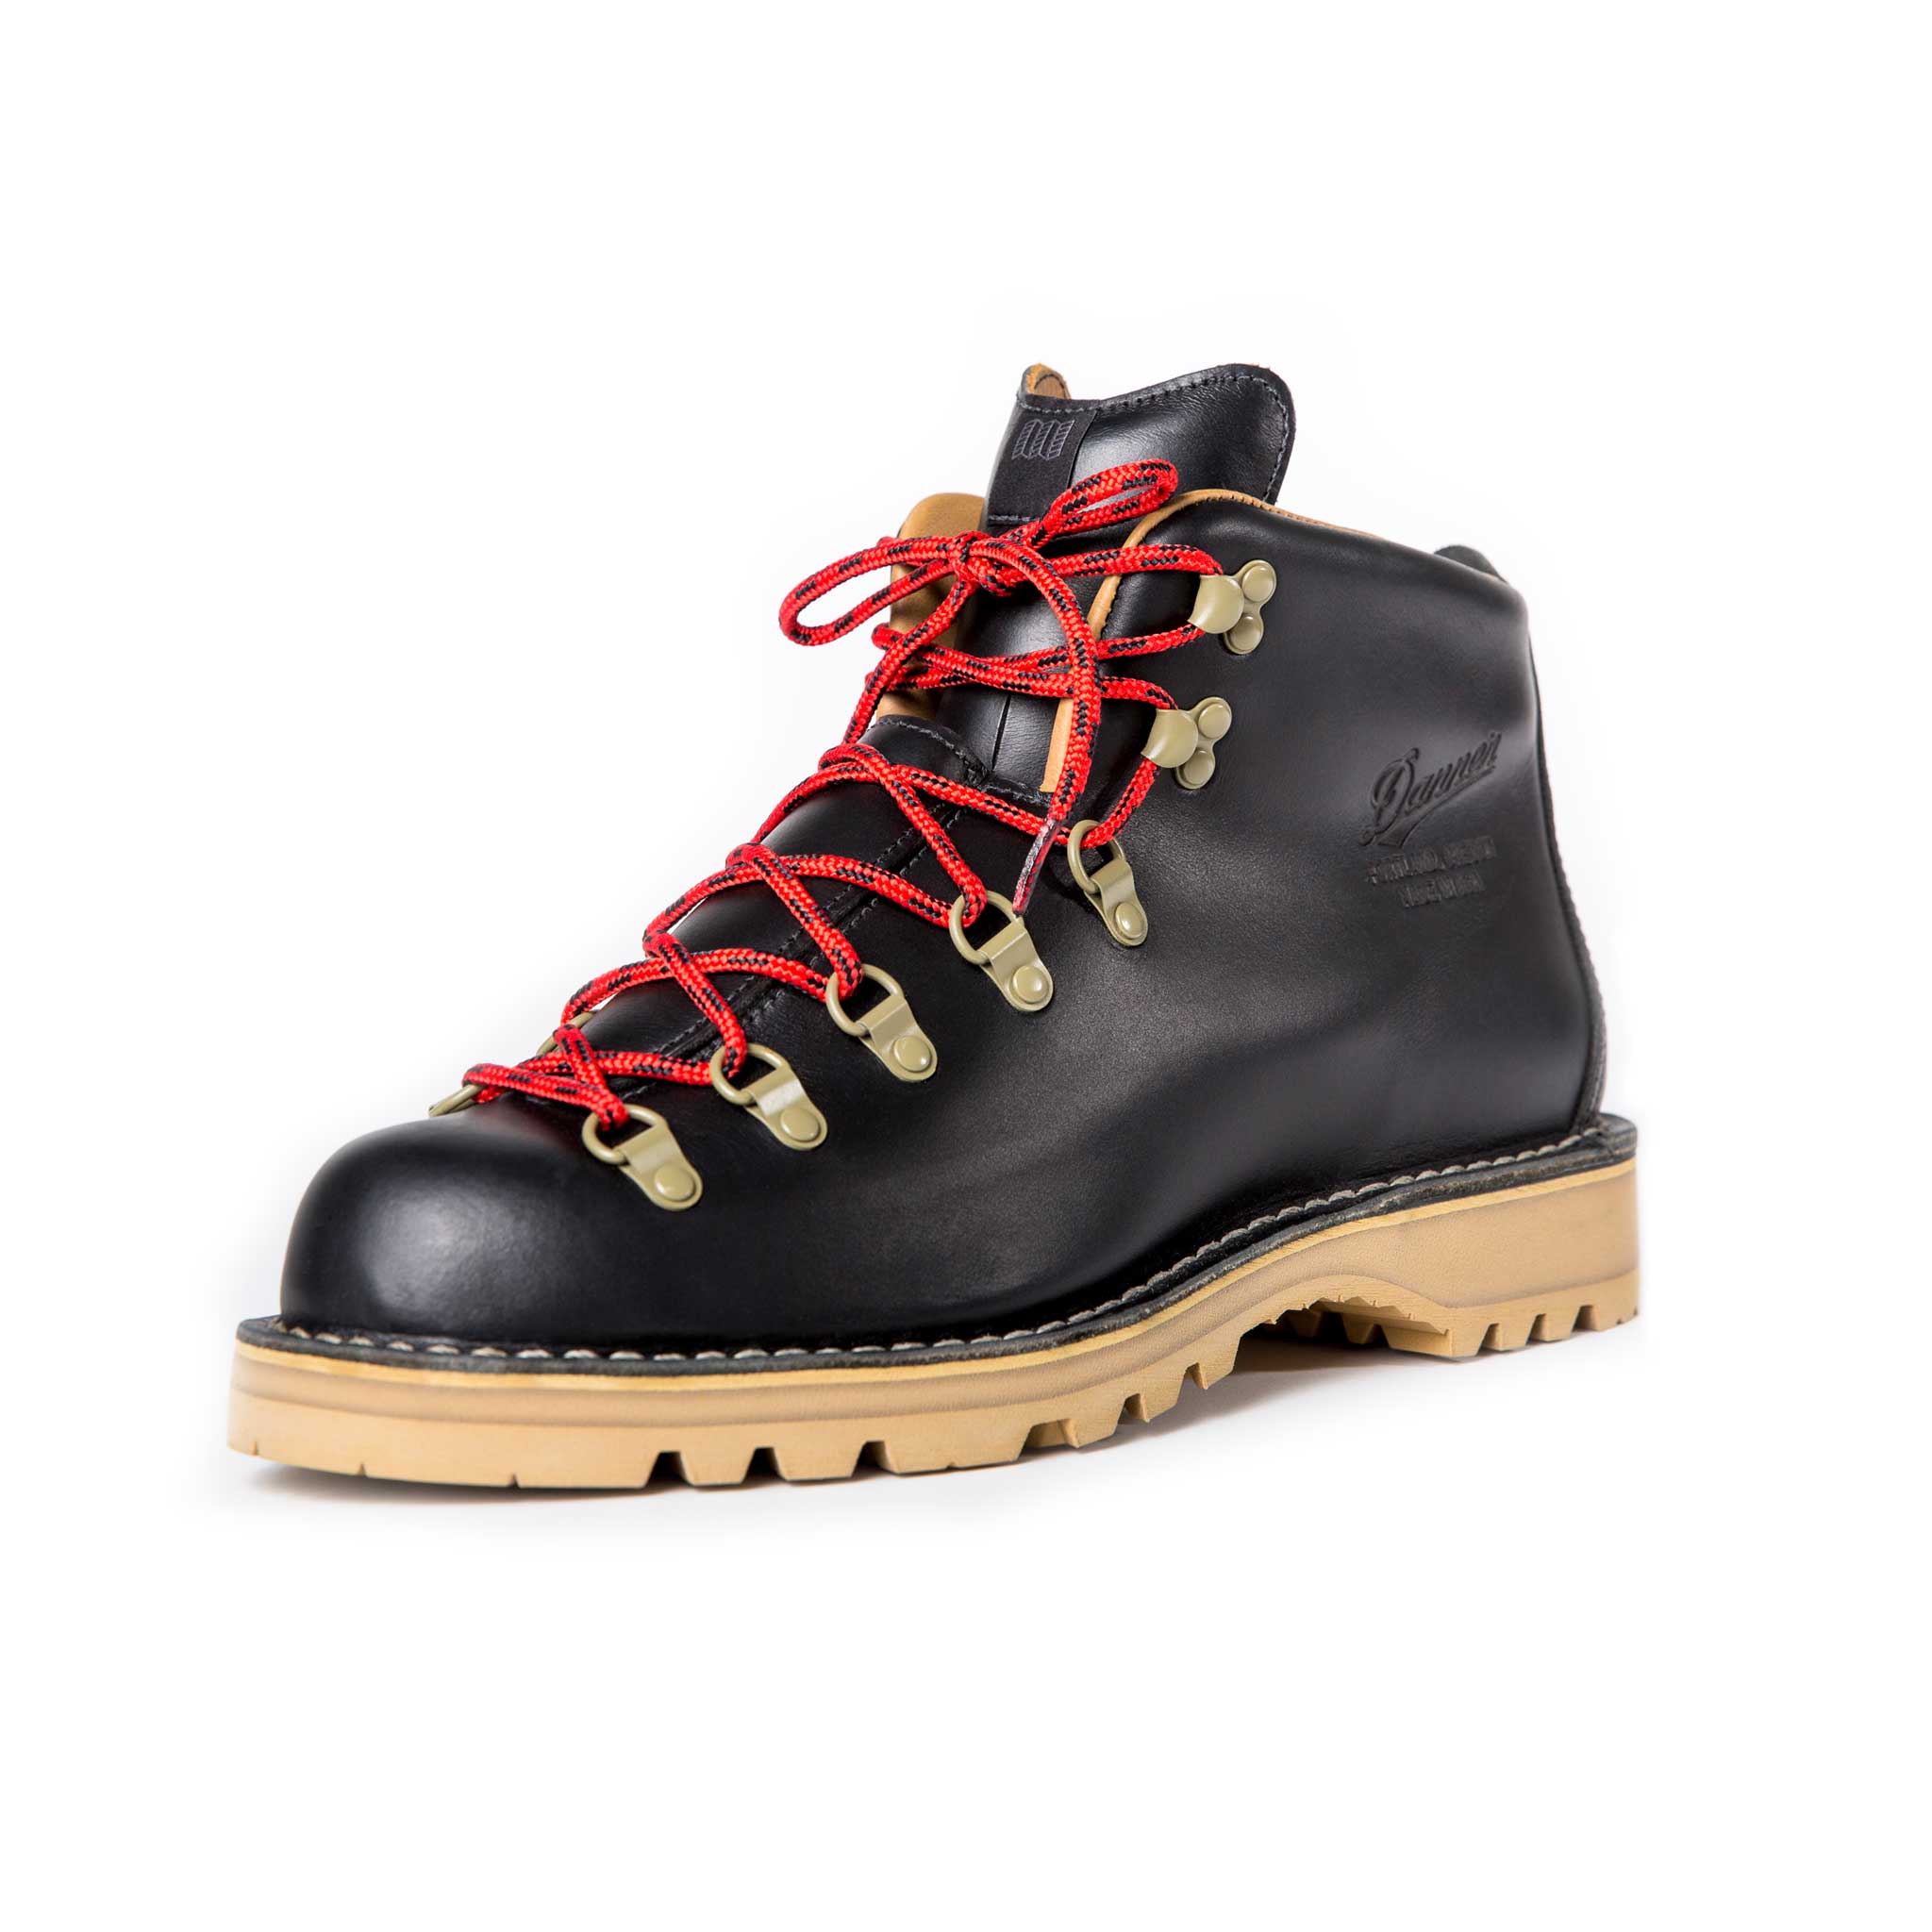 mountain designs hiking boots